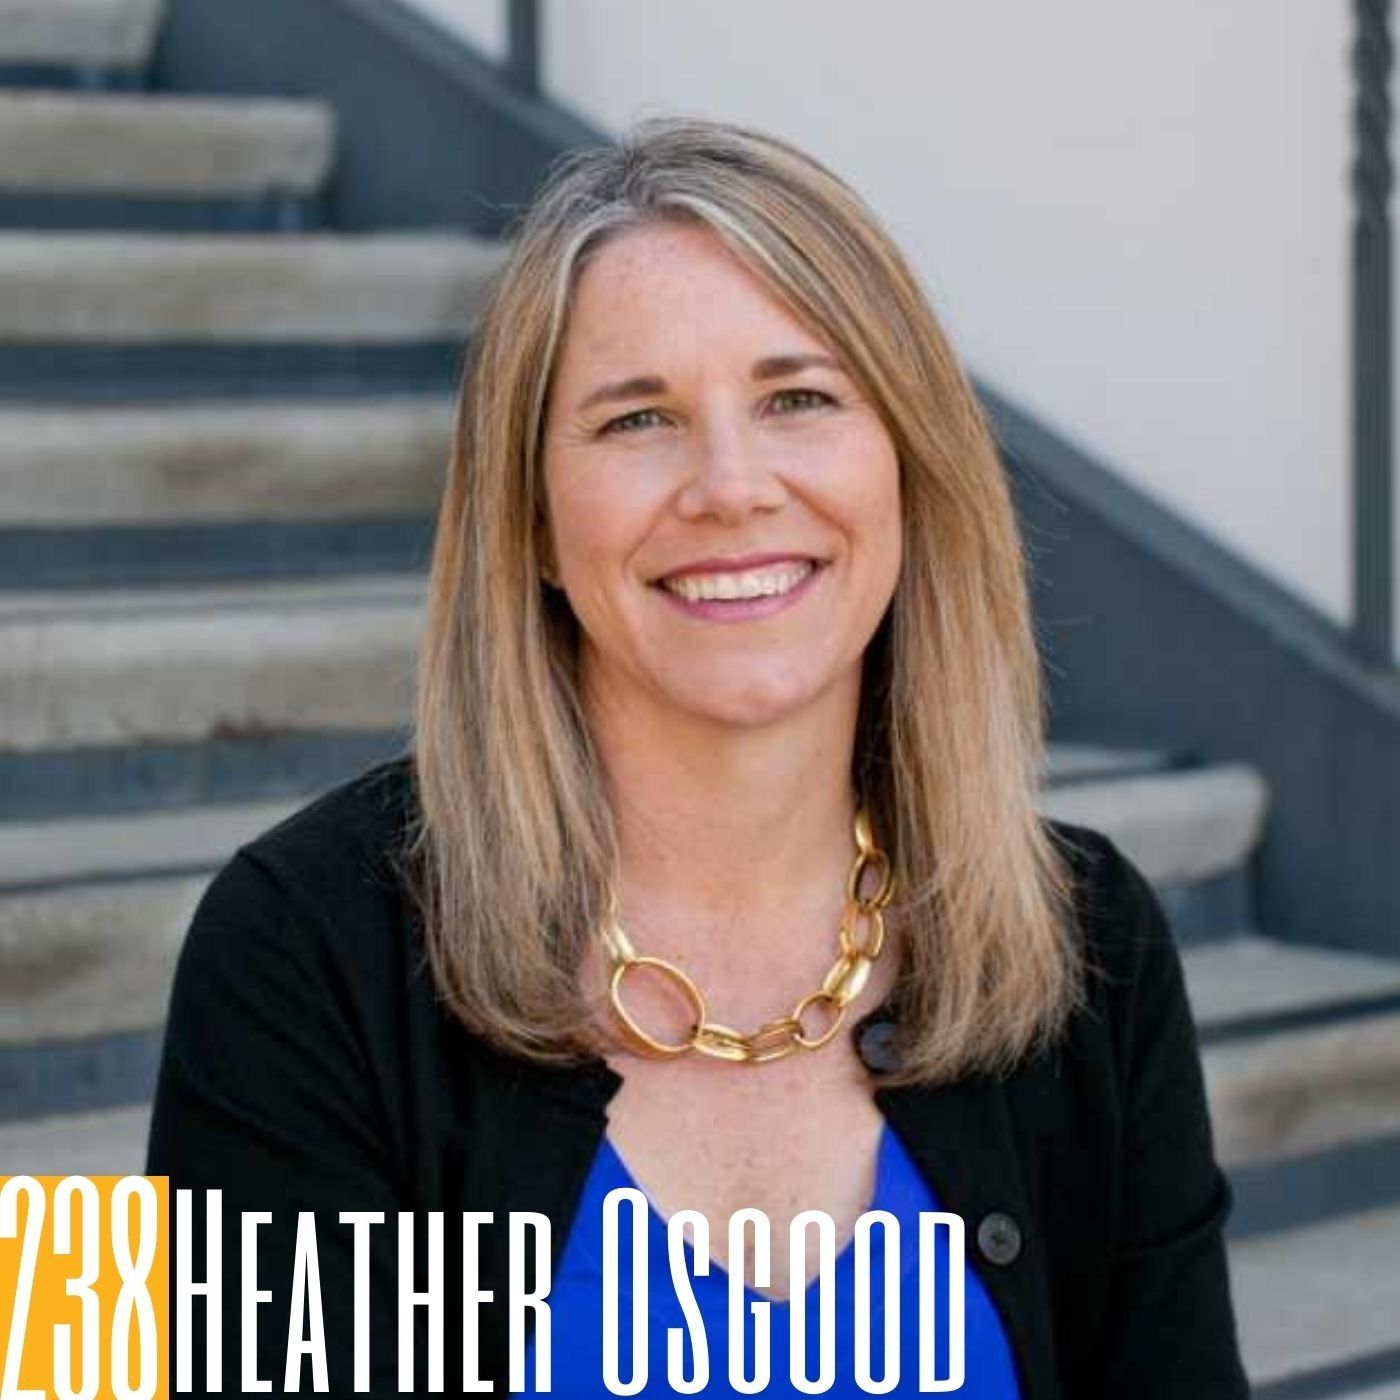 238 Heather Osgood - Start With the End in Mind